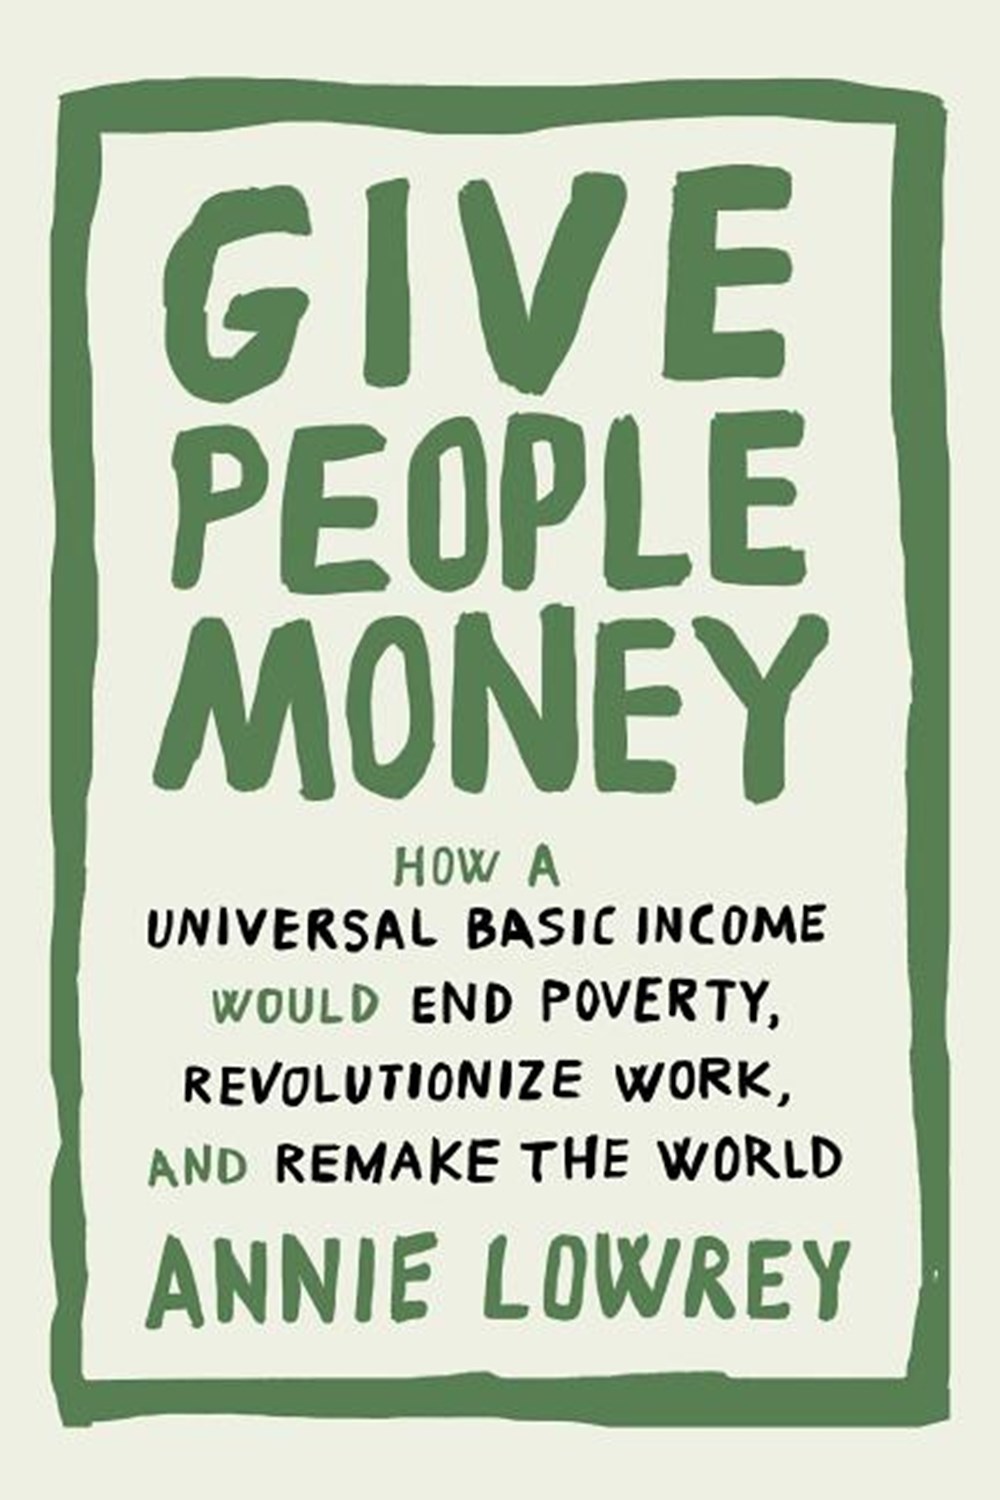 Give People Money How a Universal Basic Income Would End Poverty, Revolutionize Work, and Remake the